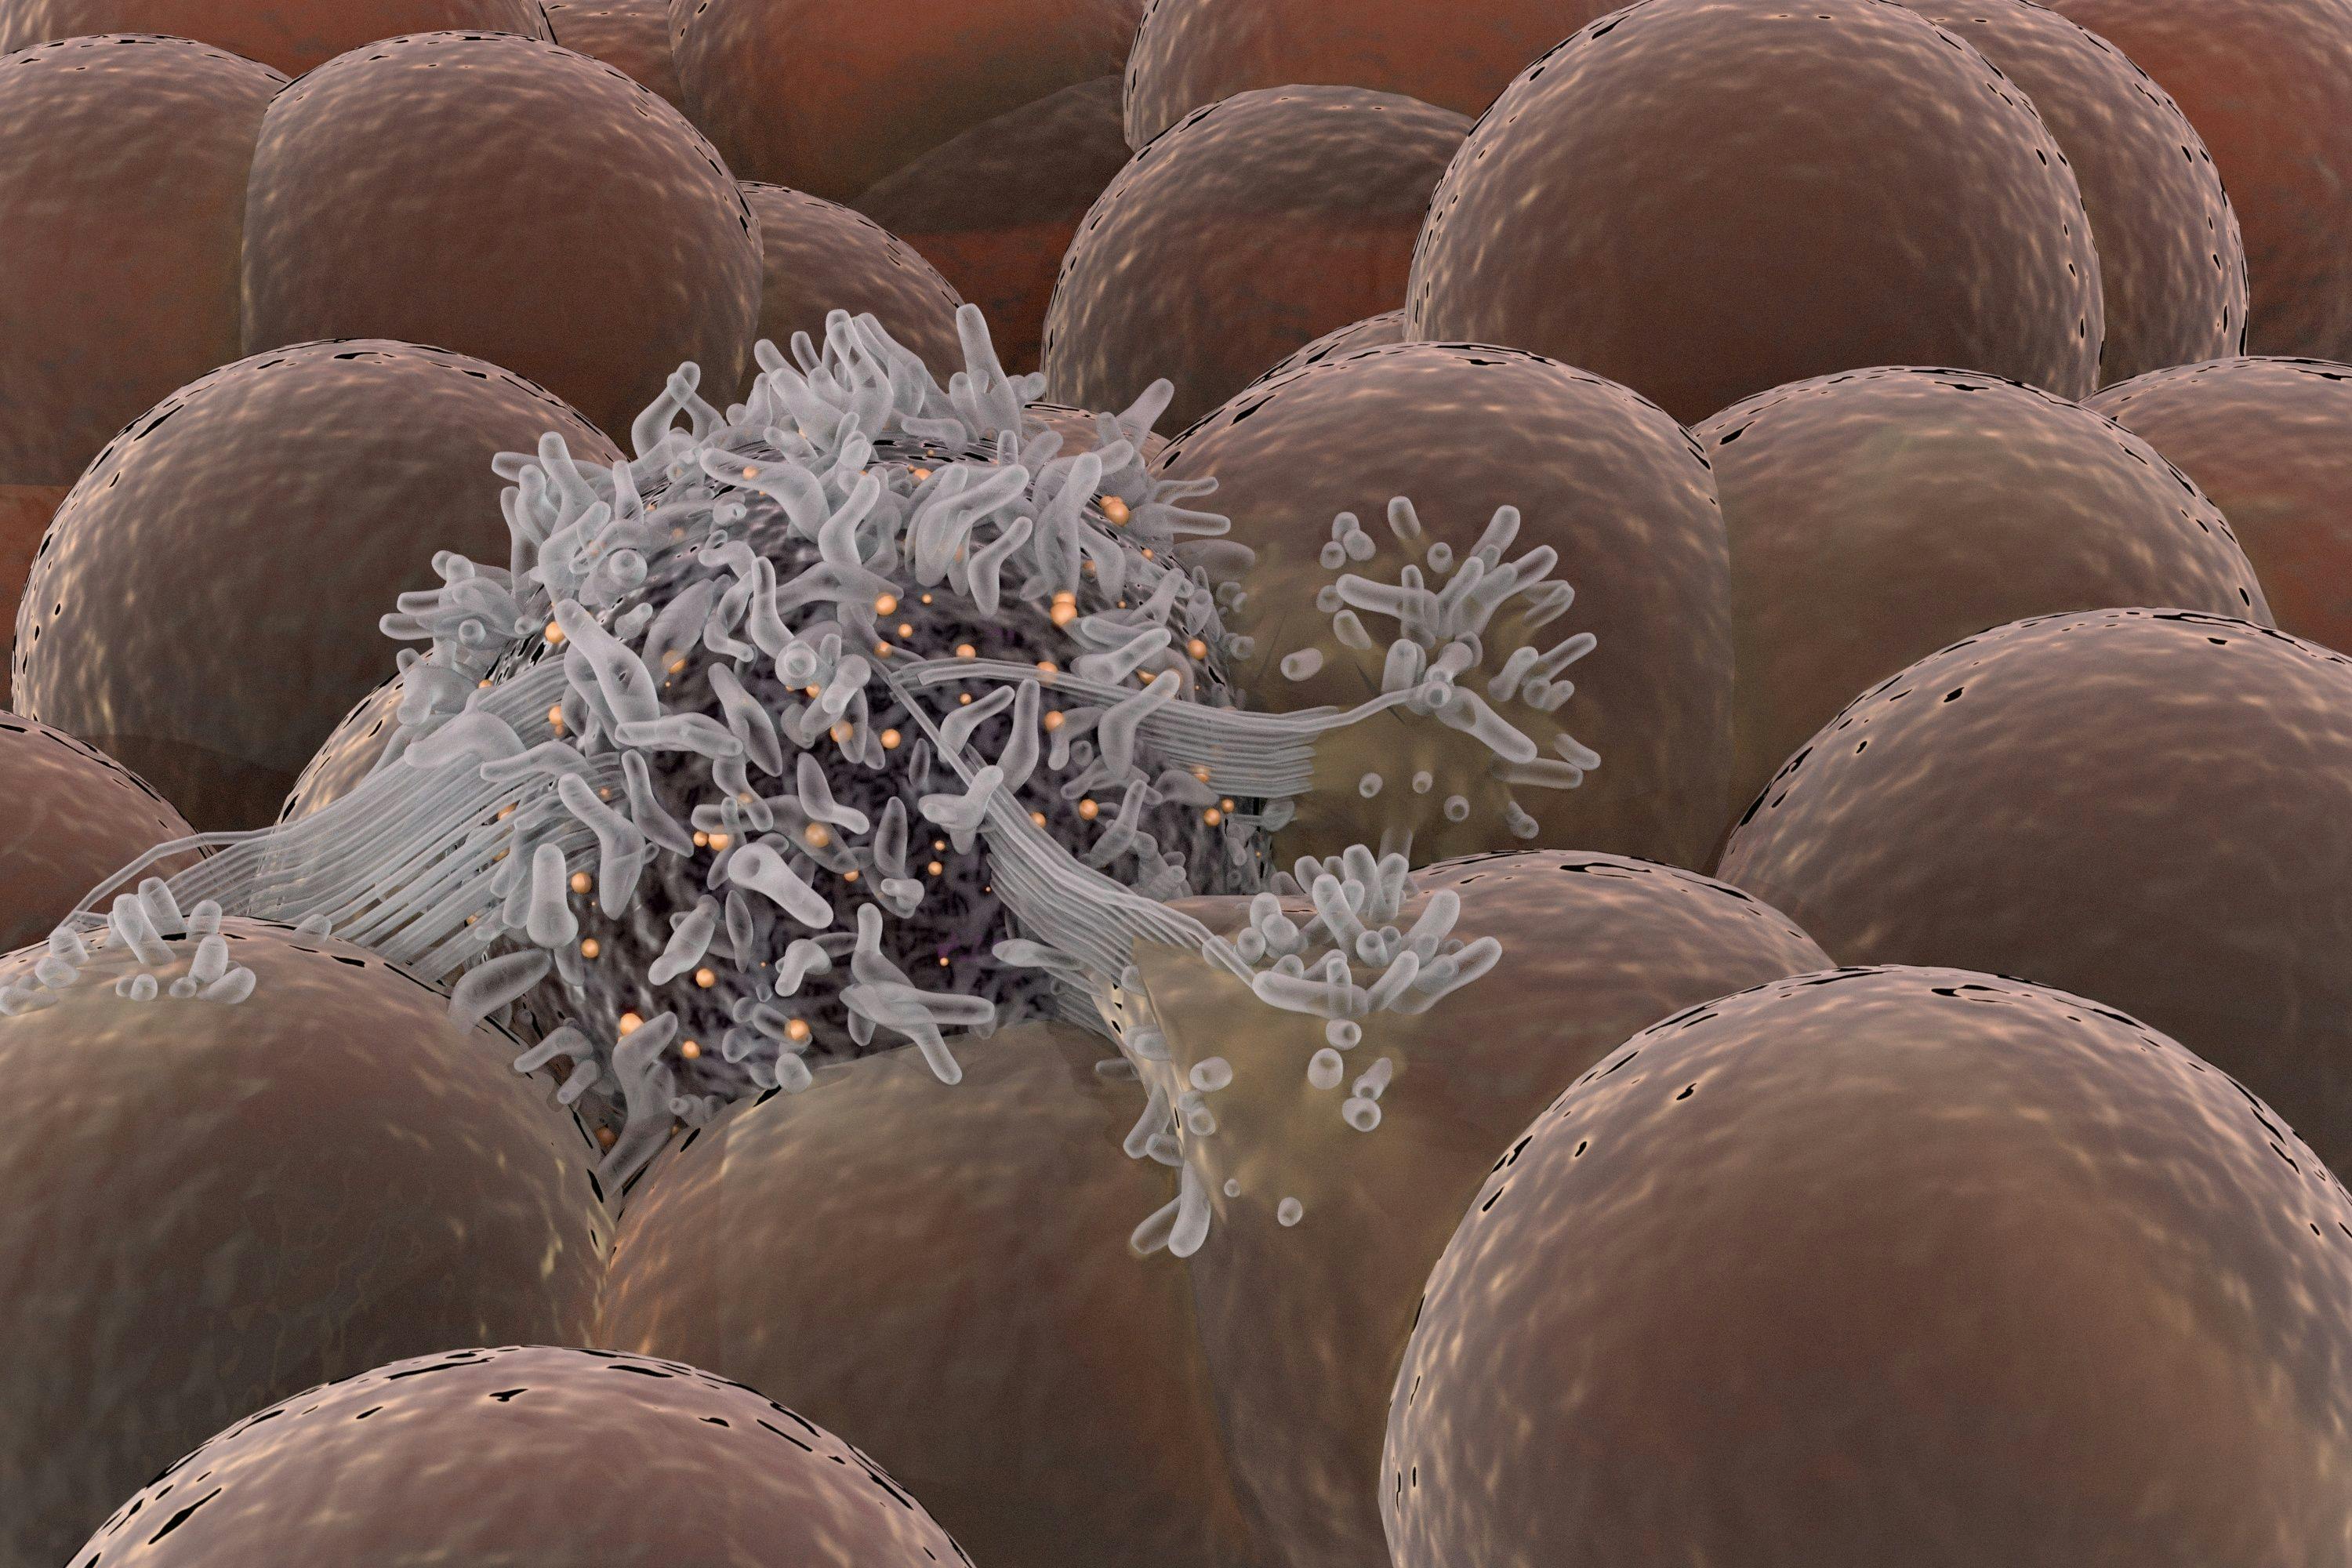 Cancer cell spreading among healthy cell stem cells© catalin - stock.adobe.com